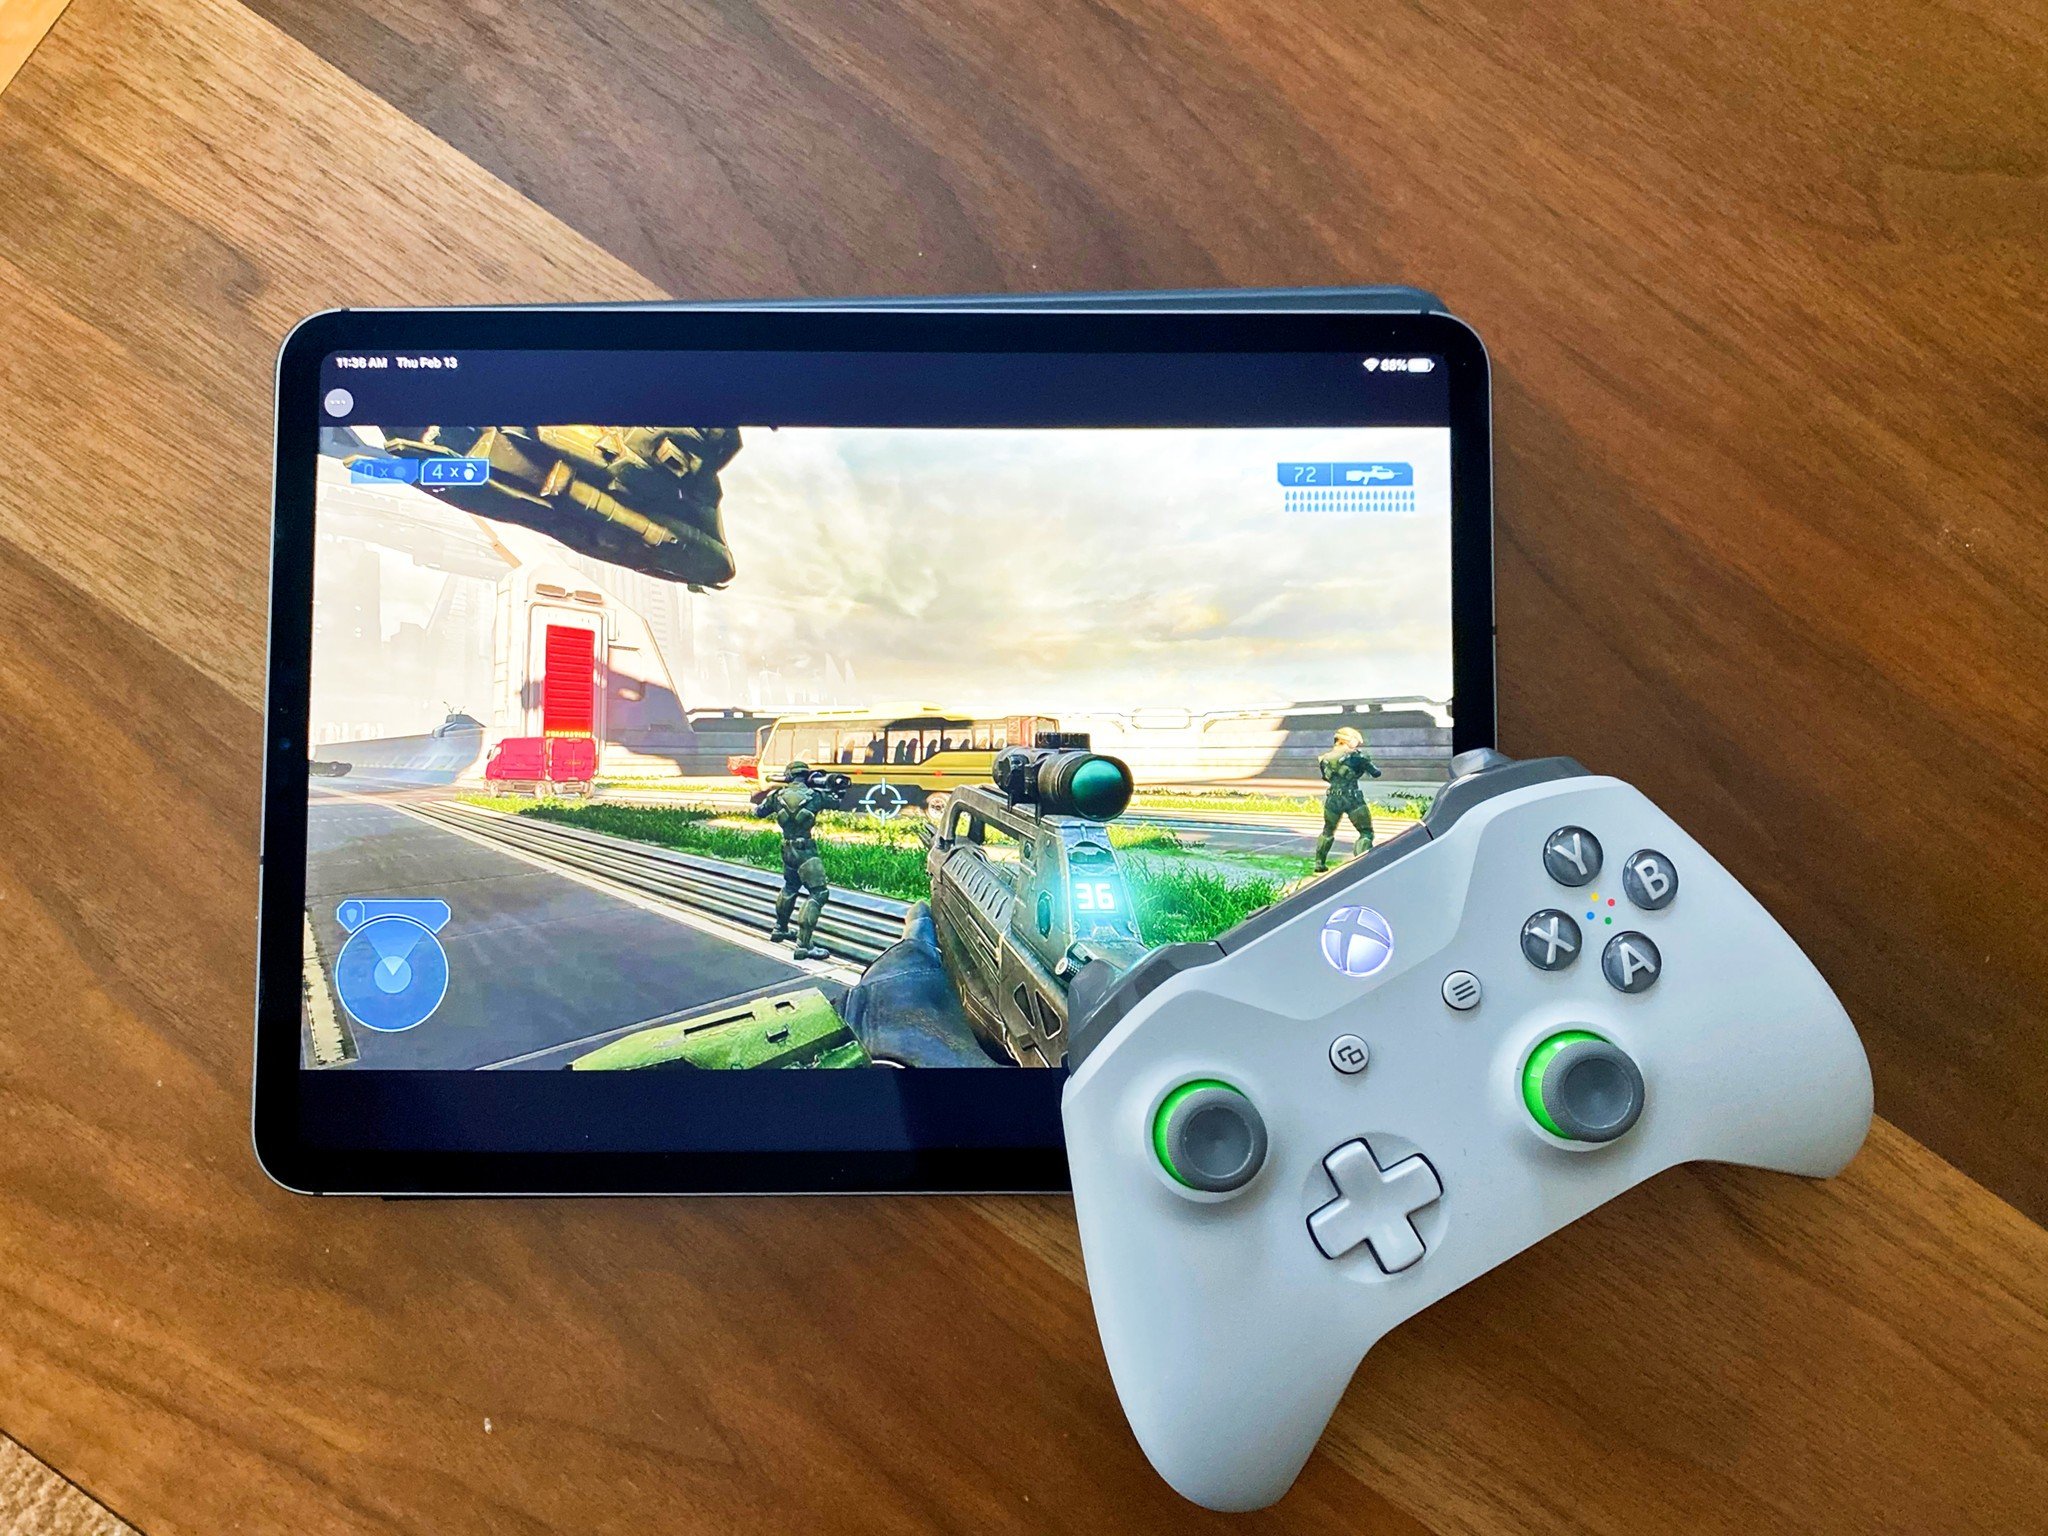 Microsoft Updates Xbox Cloud Gaming For IPhone And IPad